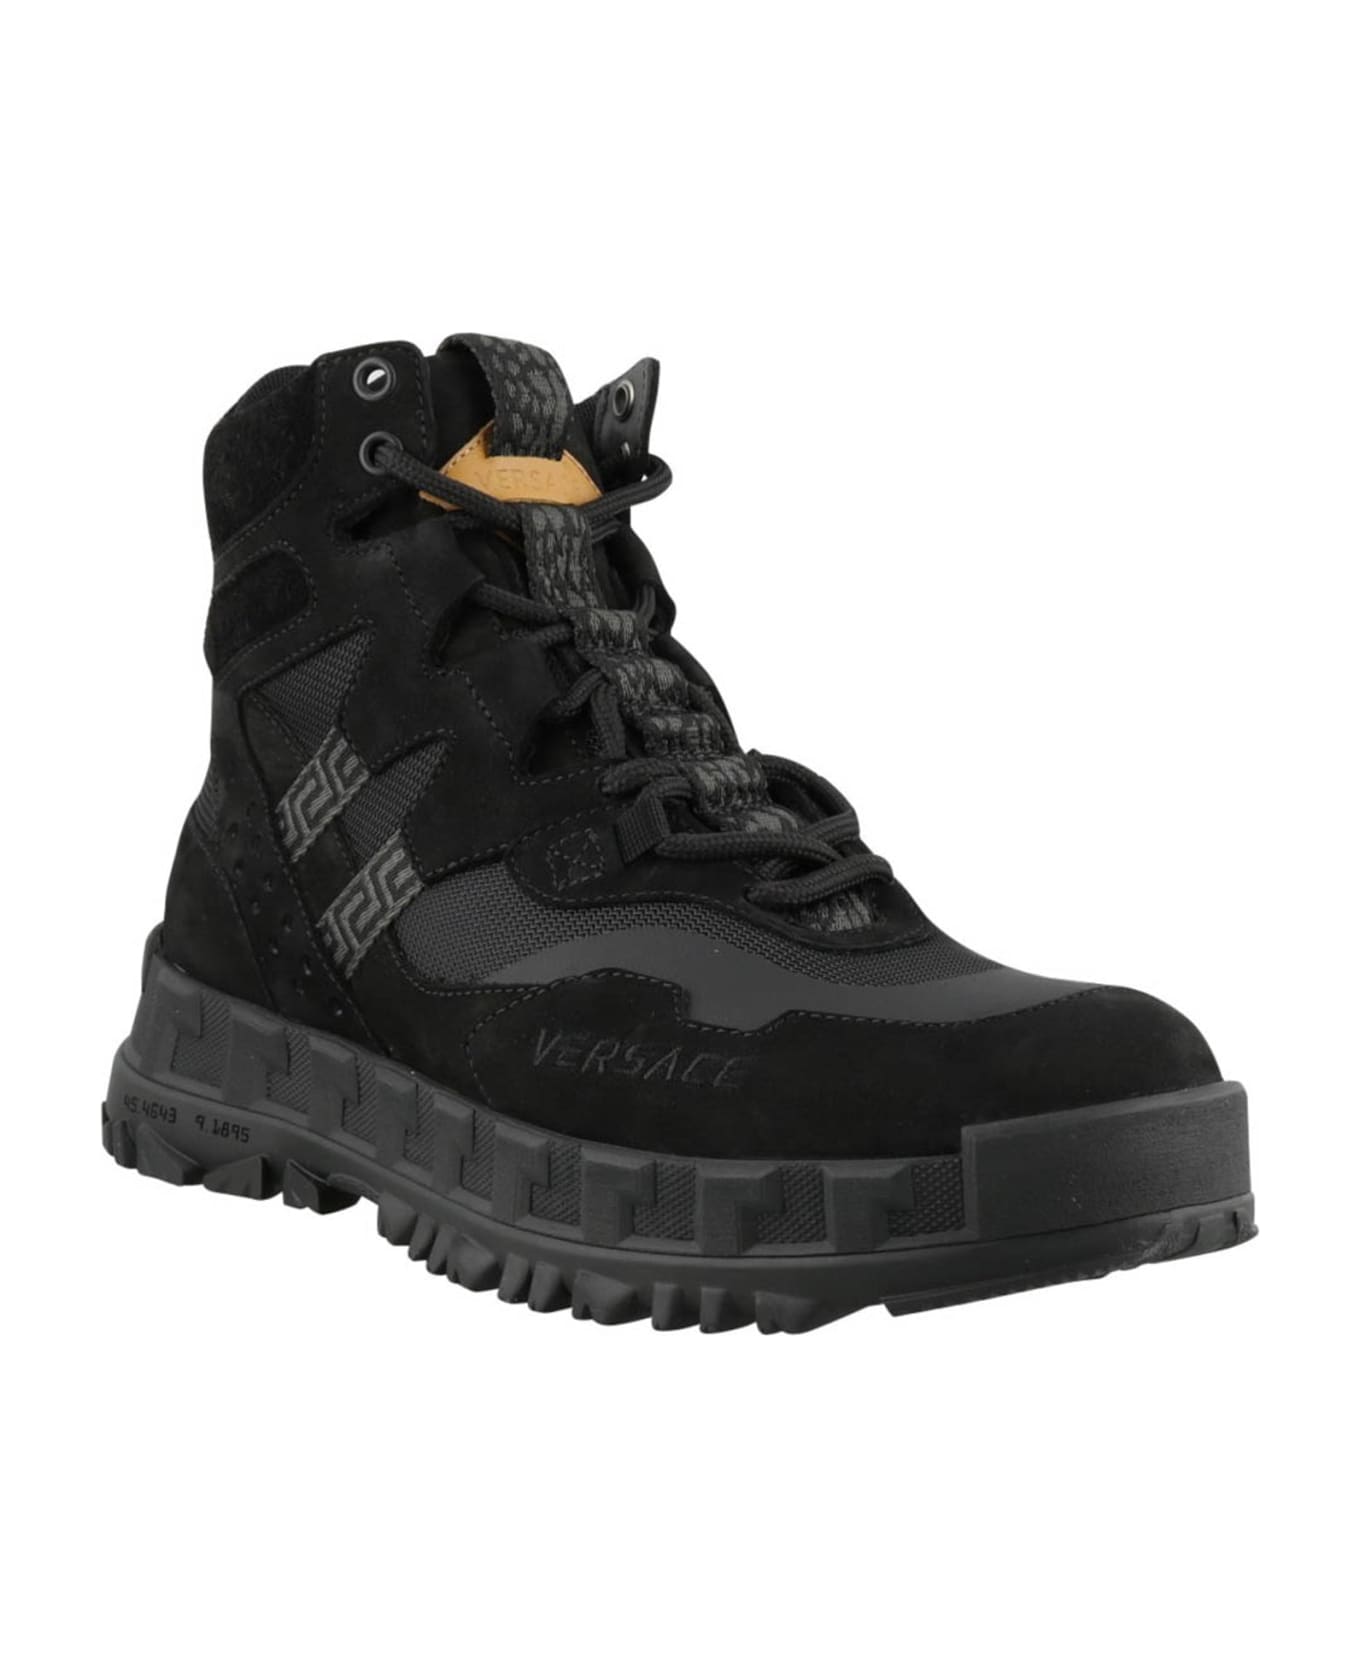 Versace Suede Hiking Boots - Black